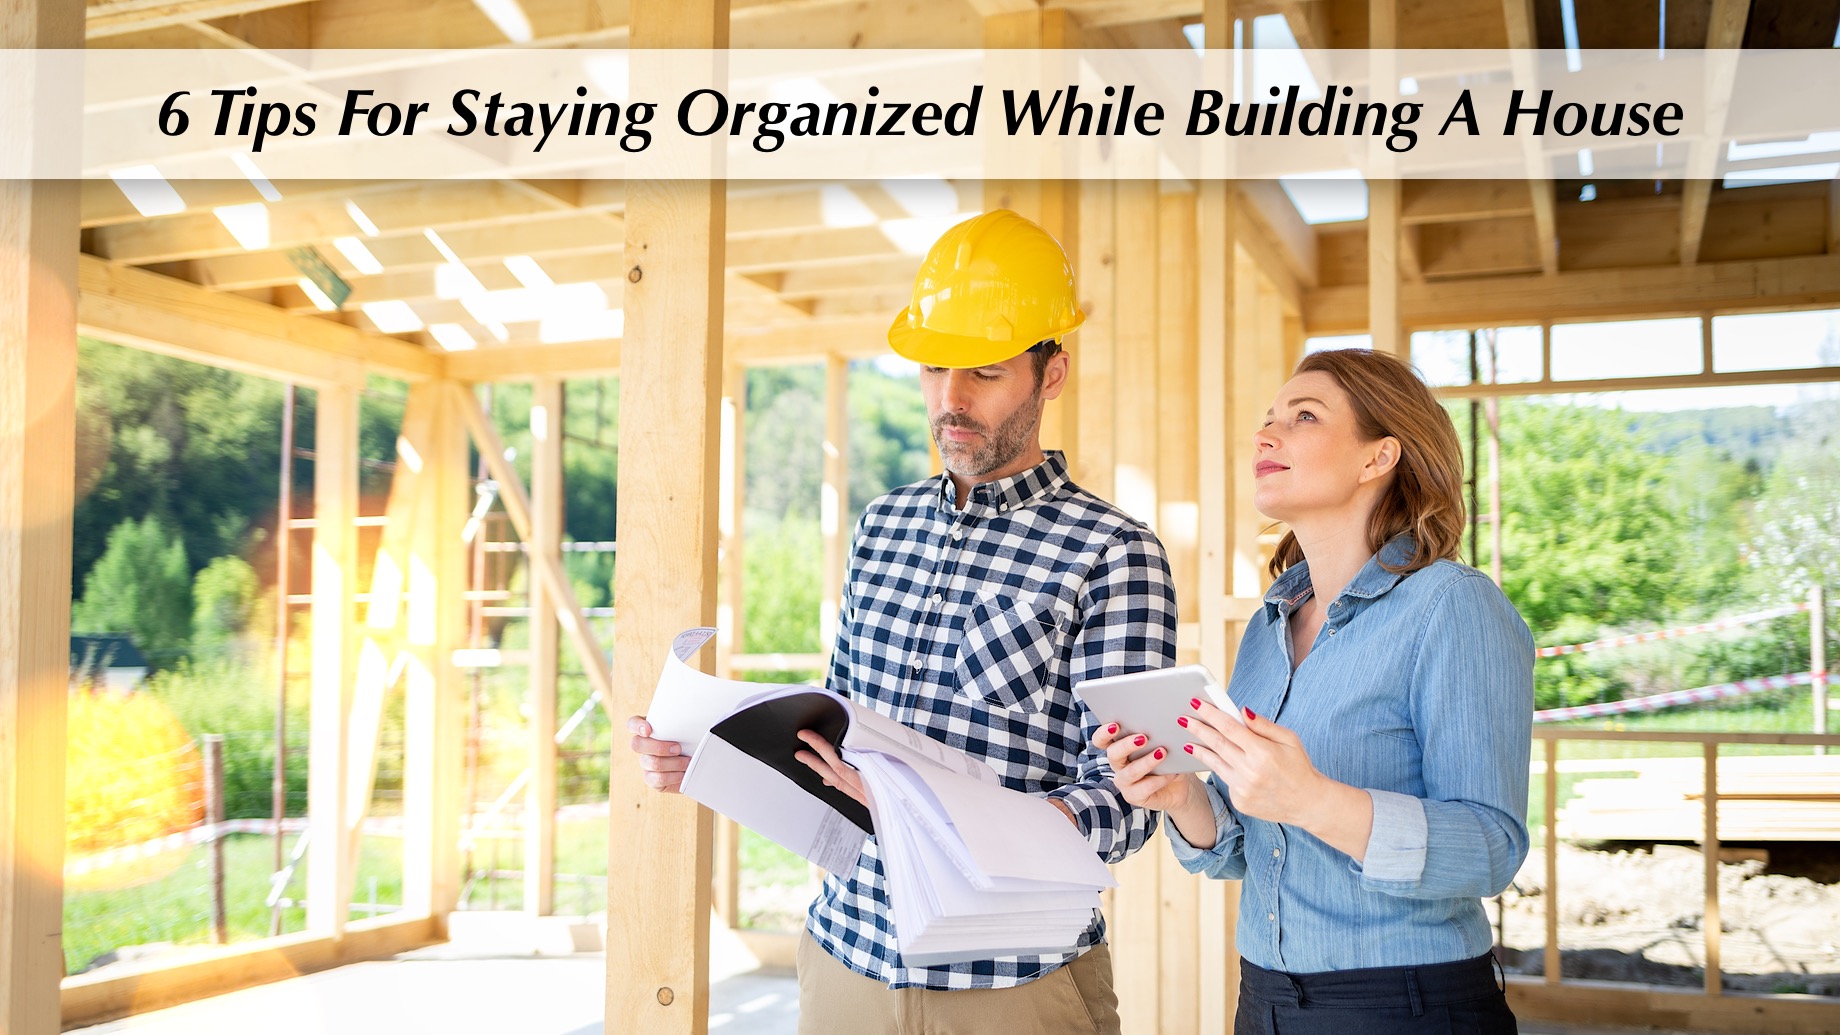 6 Tips For Staying Organized While Building A House